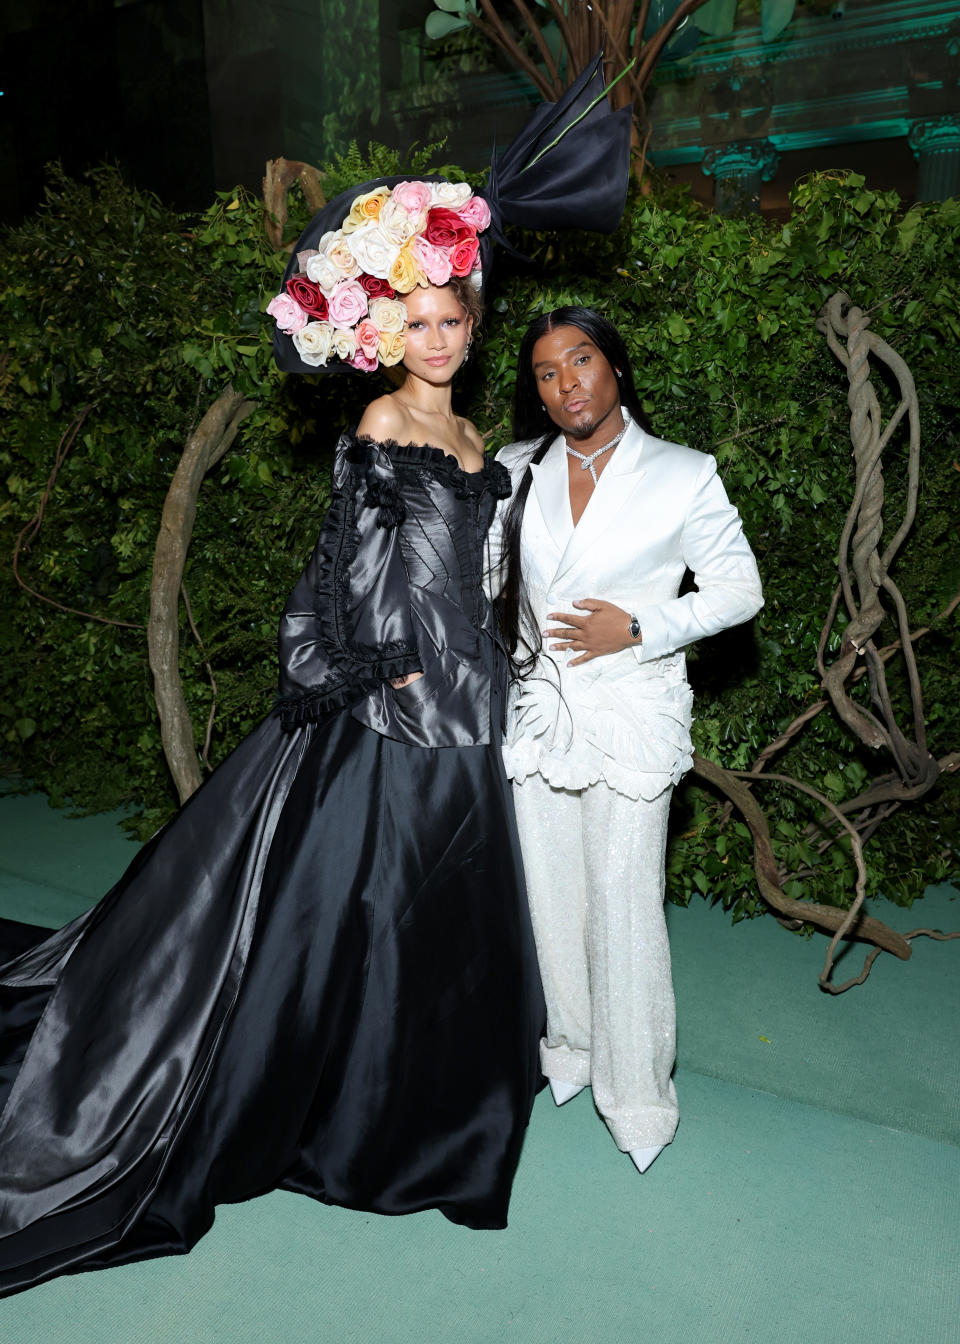 Zendaya and Law Roach on the green carpet, one in a black gown with floral headpiece, the other in a white suit with ruffles